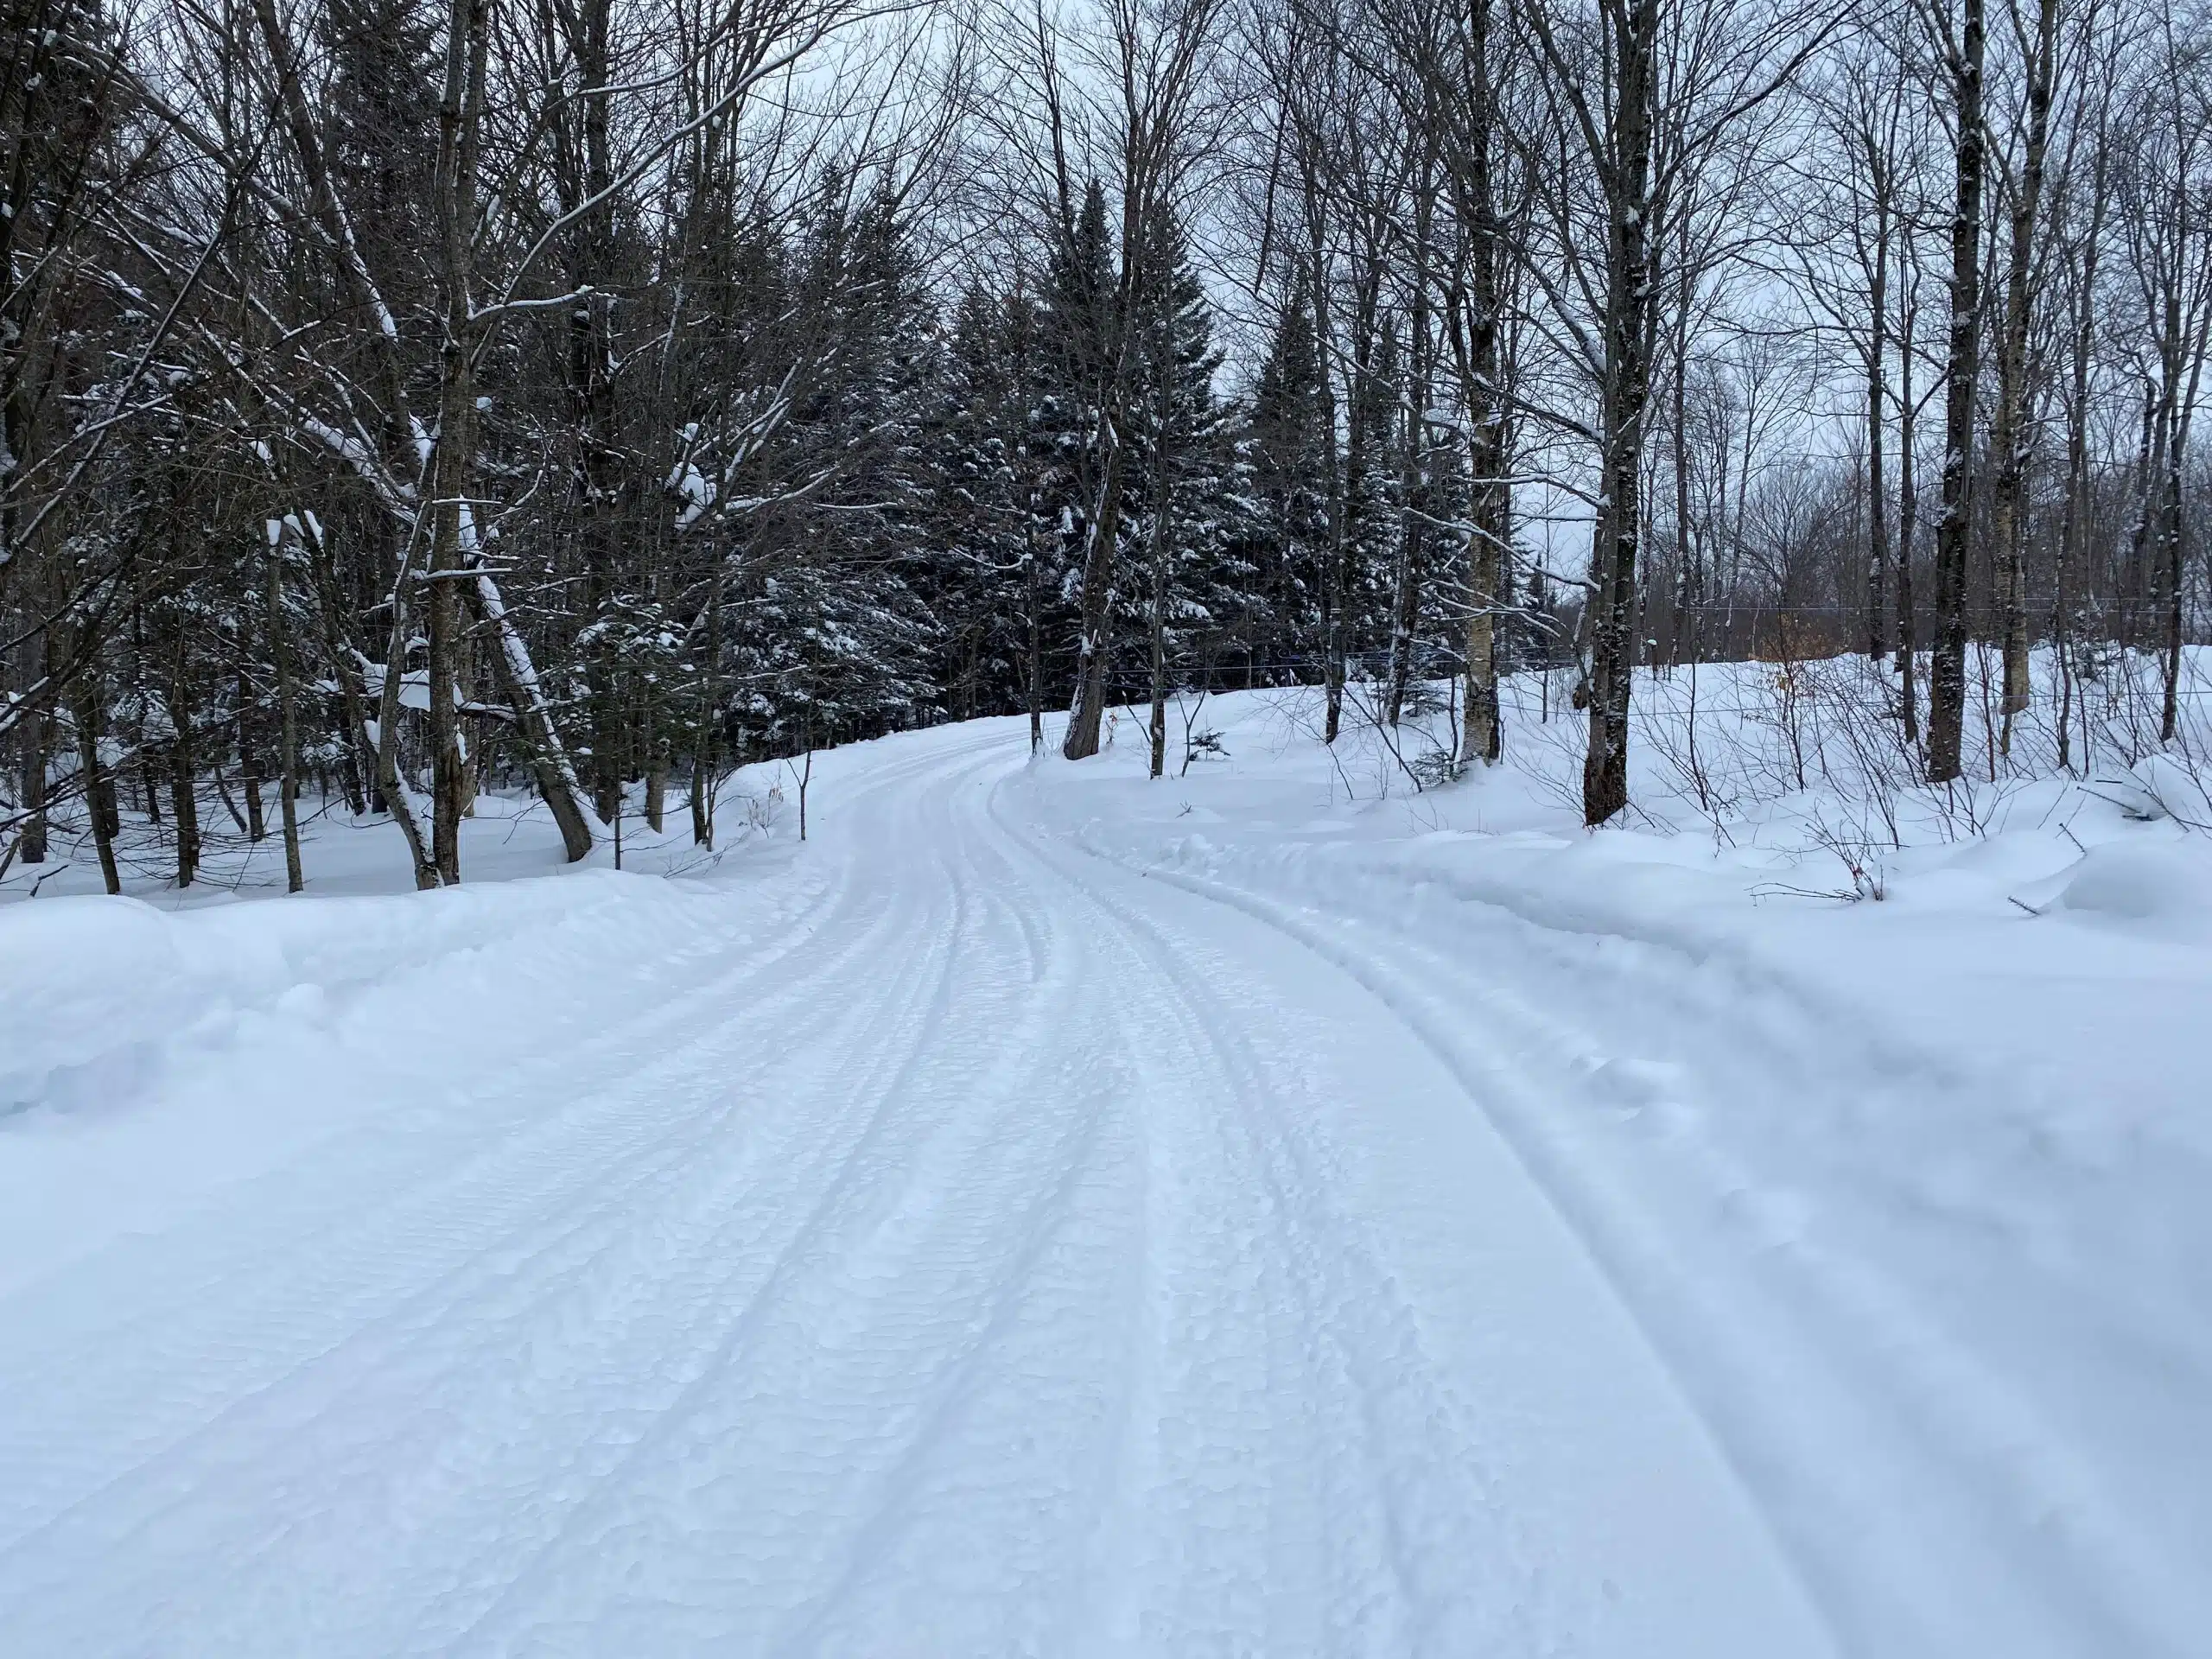 Discovering the snowy trail in Centre-du-Québec